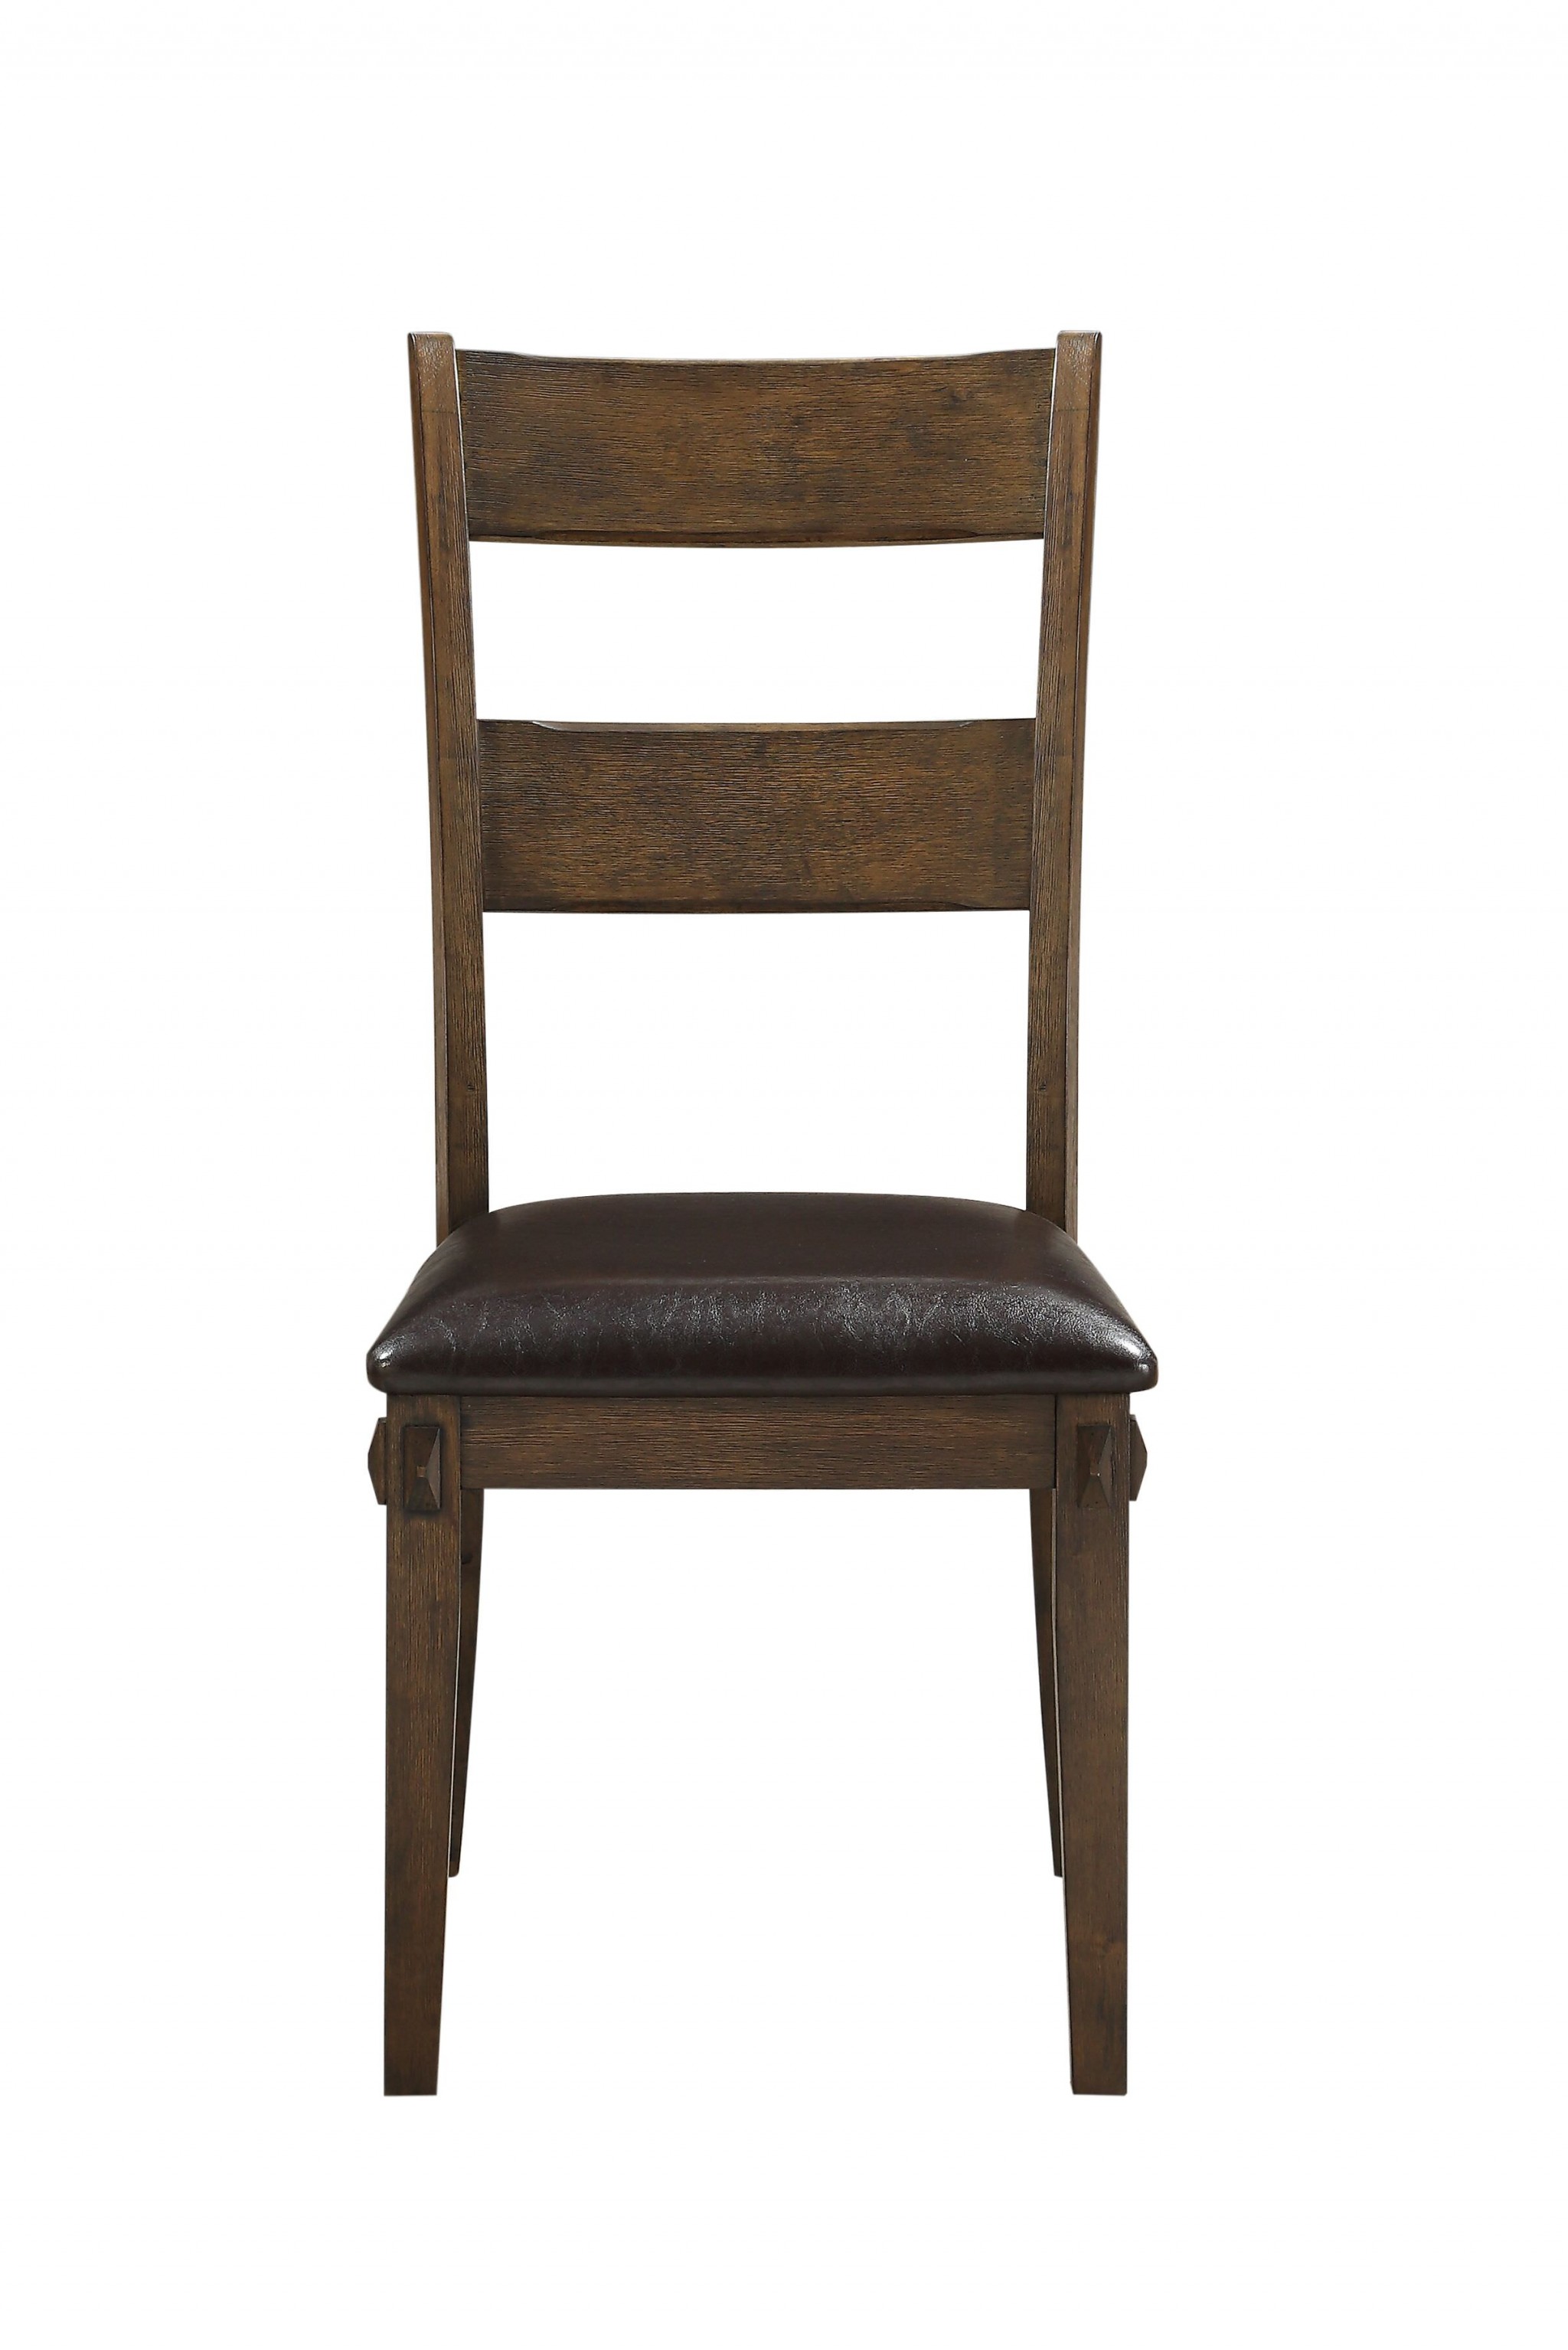 19" X 21" X 39" Faux Leather Upholstered and Dark Oak Wood Side Chair